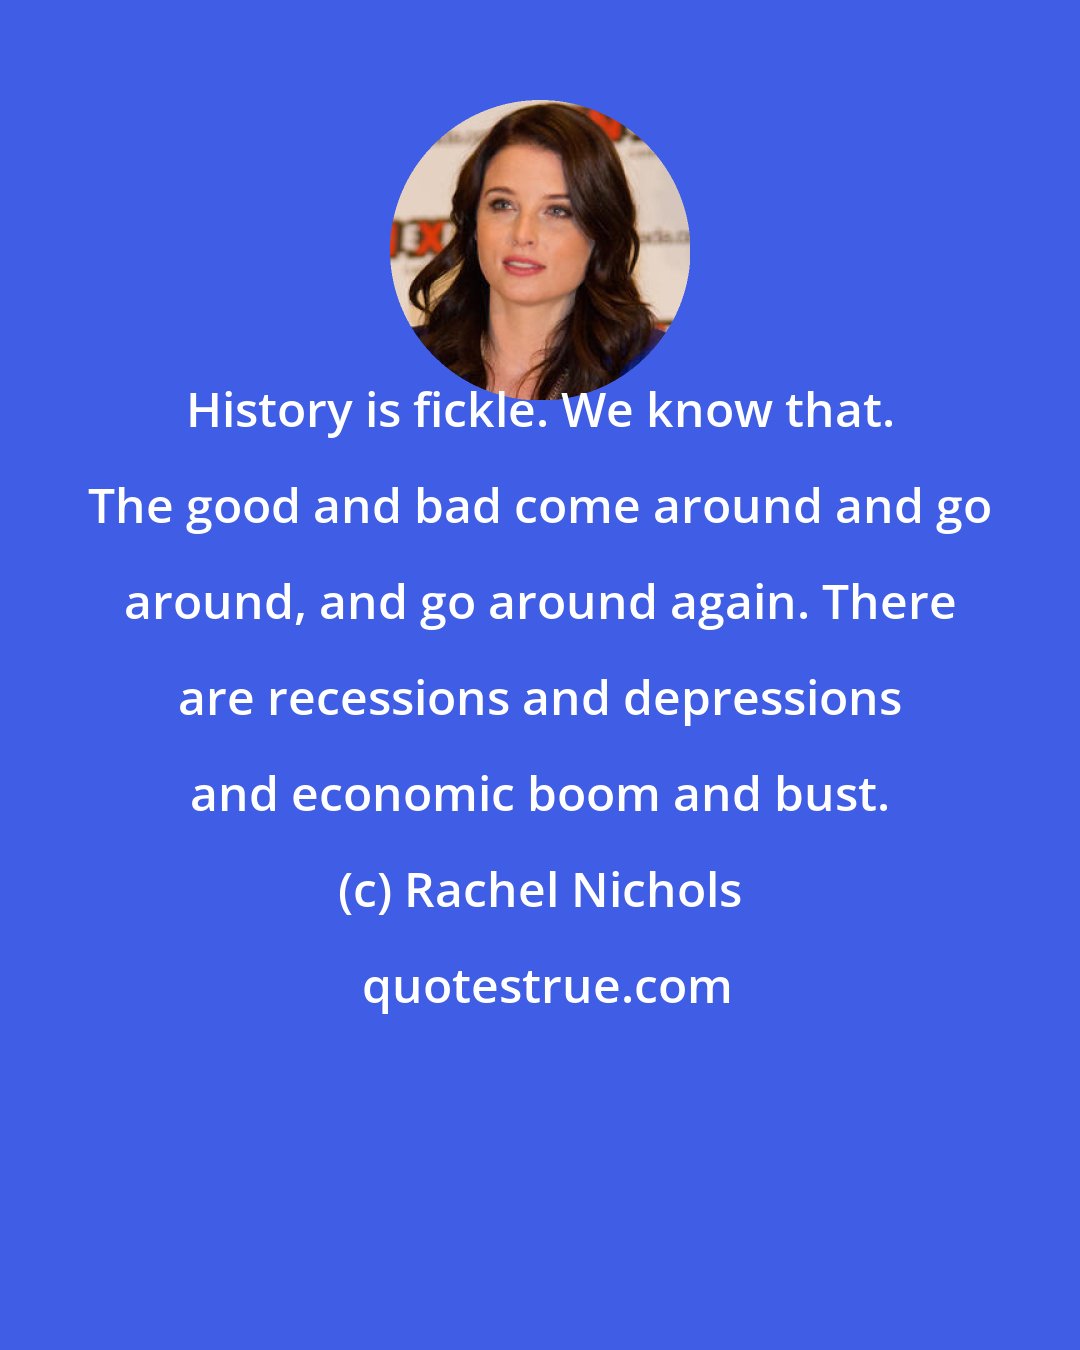 Rachel Nichols: History is fickle. We know that. The good and bad come around and go around, and go around again. There are recessions and depressions and economic boom and bust.